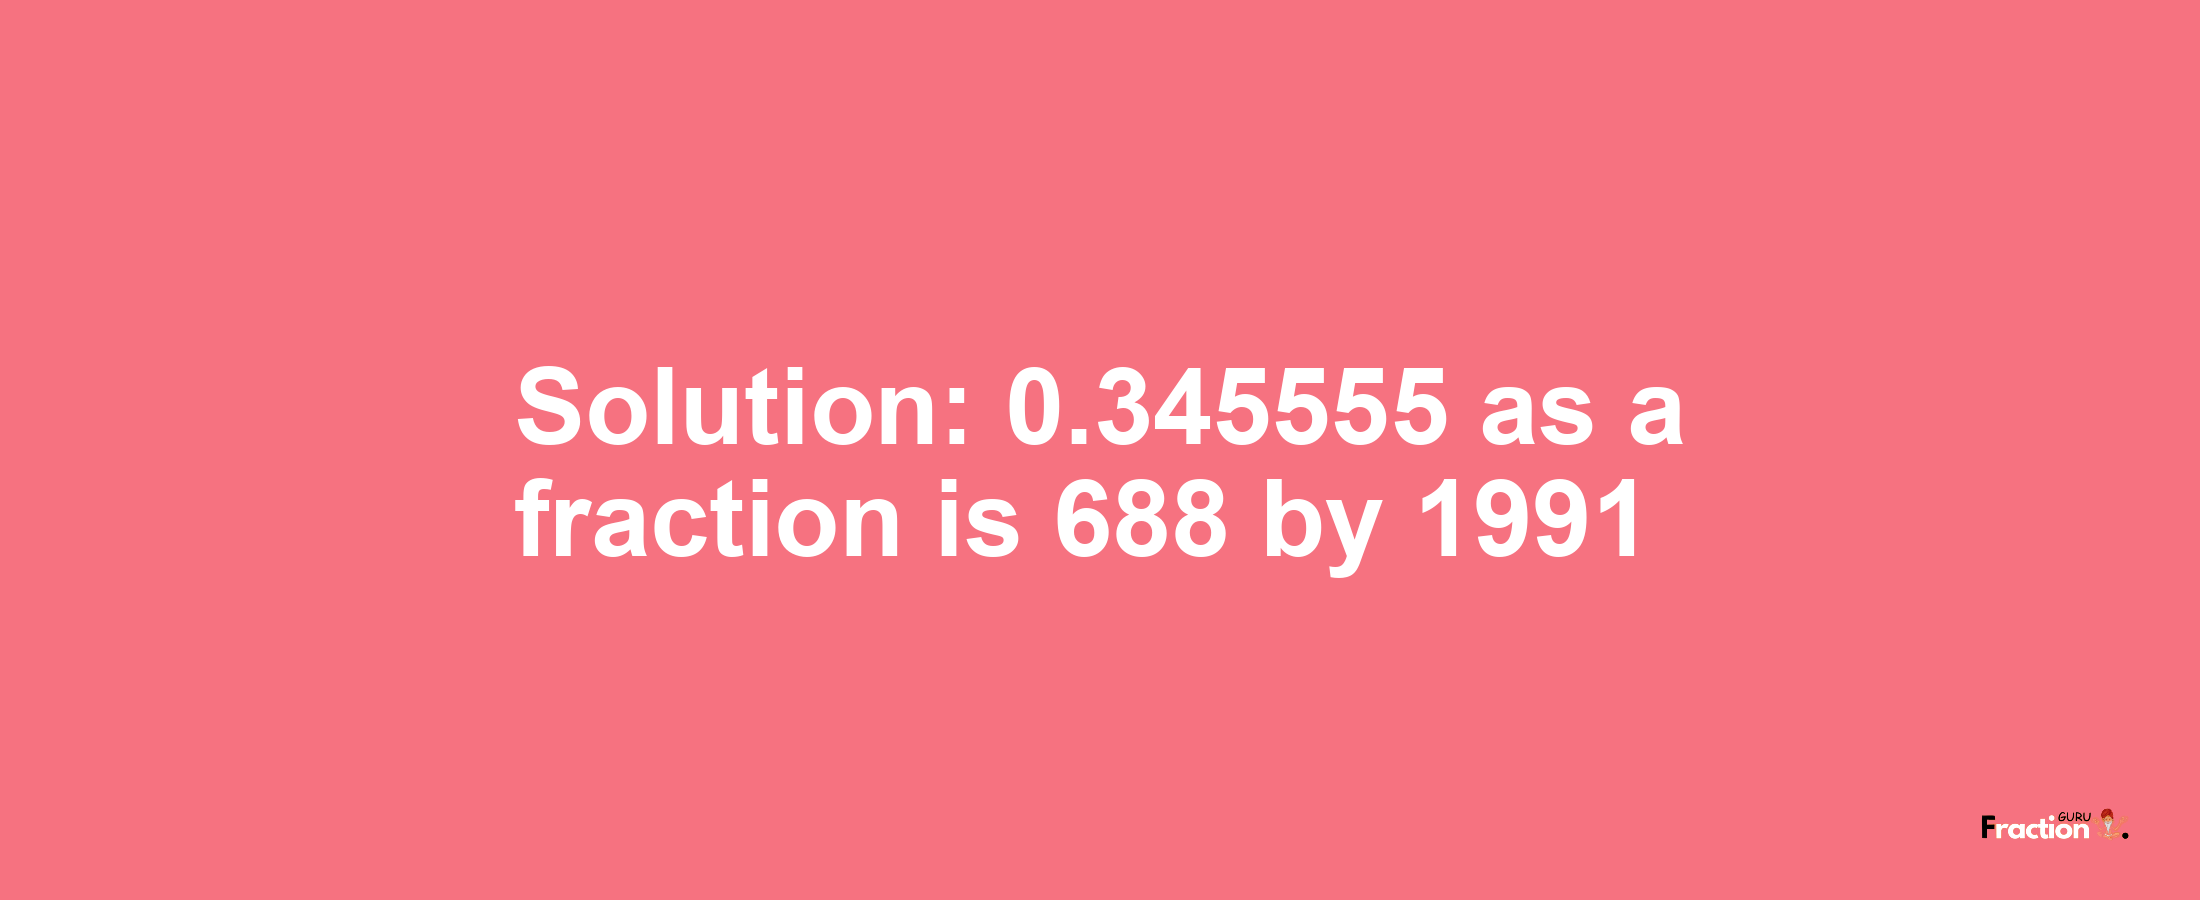 Solution:0.345555 as a fraction is 688/1991